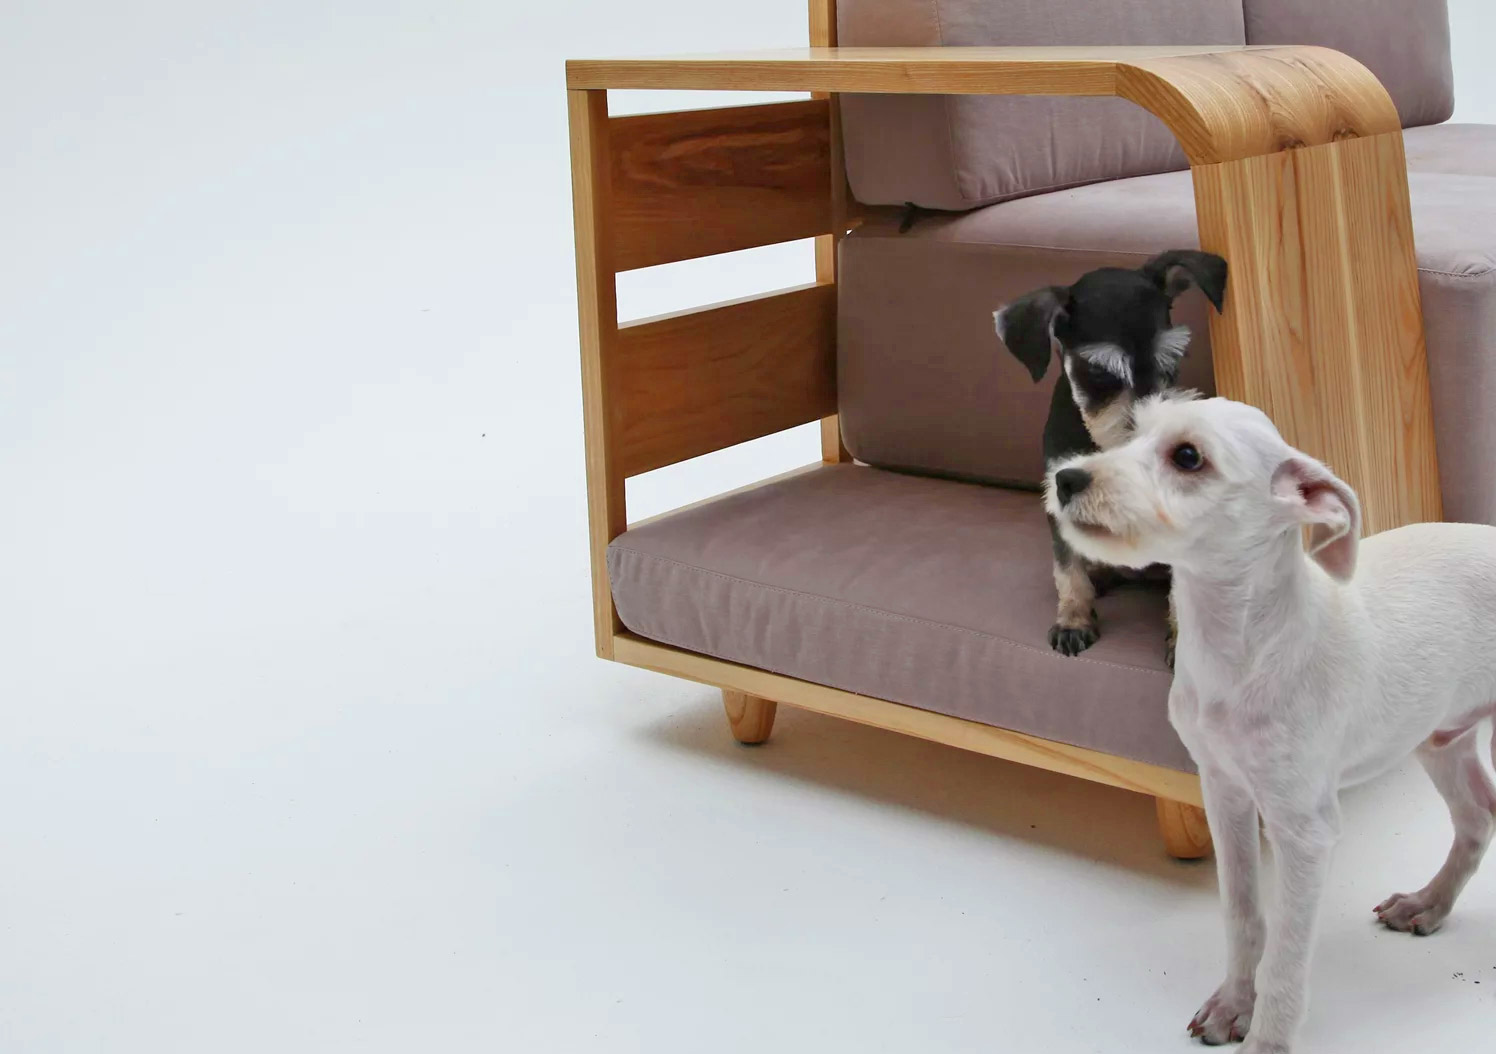 Dog House Sofa Has an Integrated Dog Bed In The Armrest - Dog bed in couch sofa wooden armrest